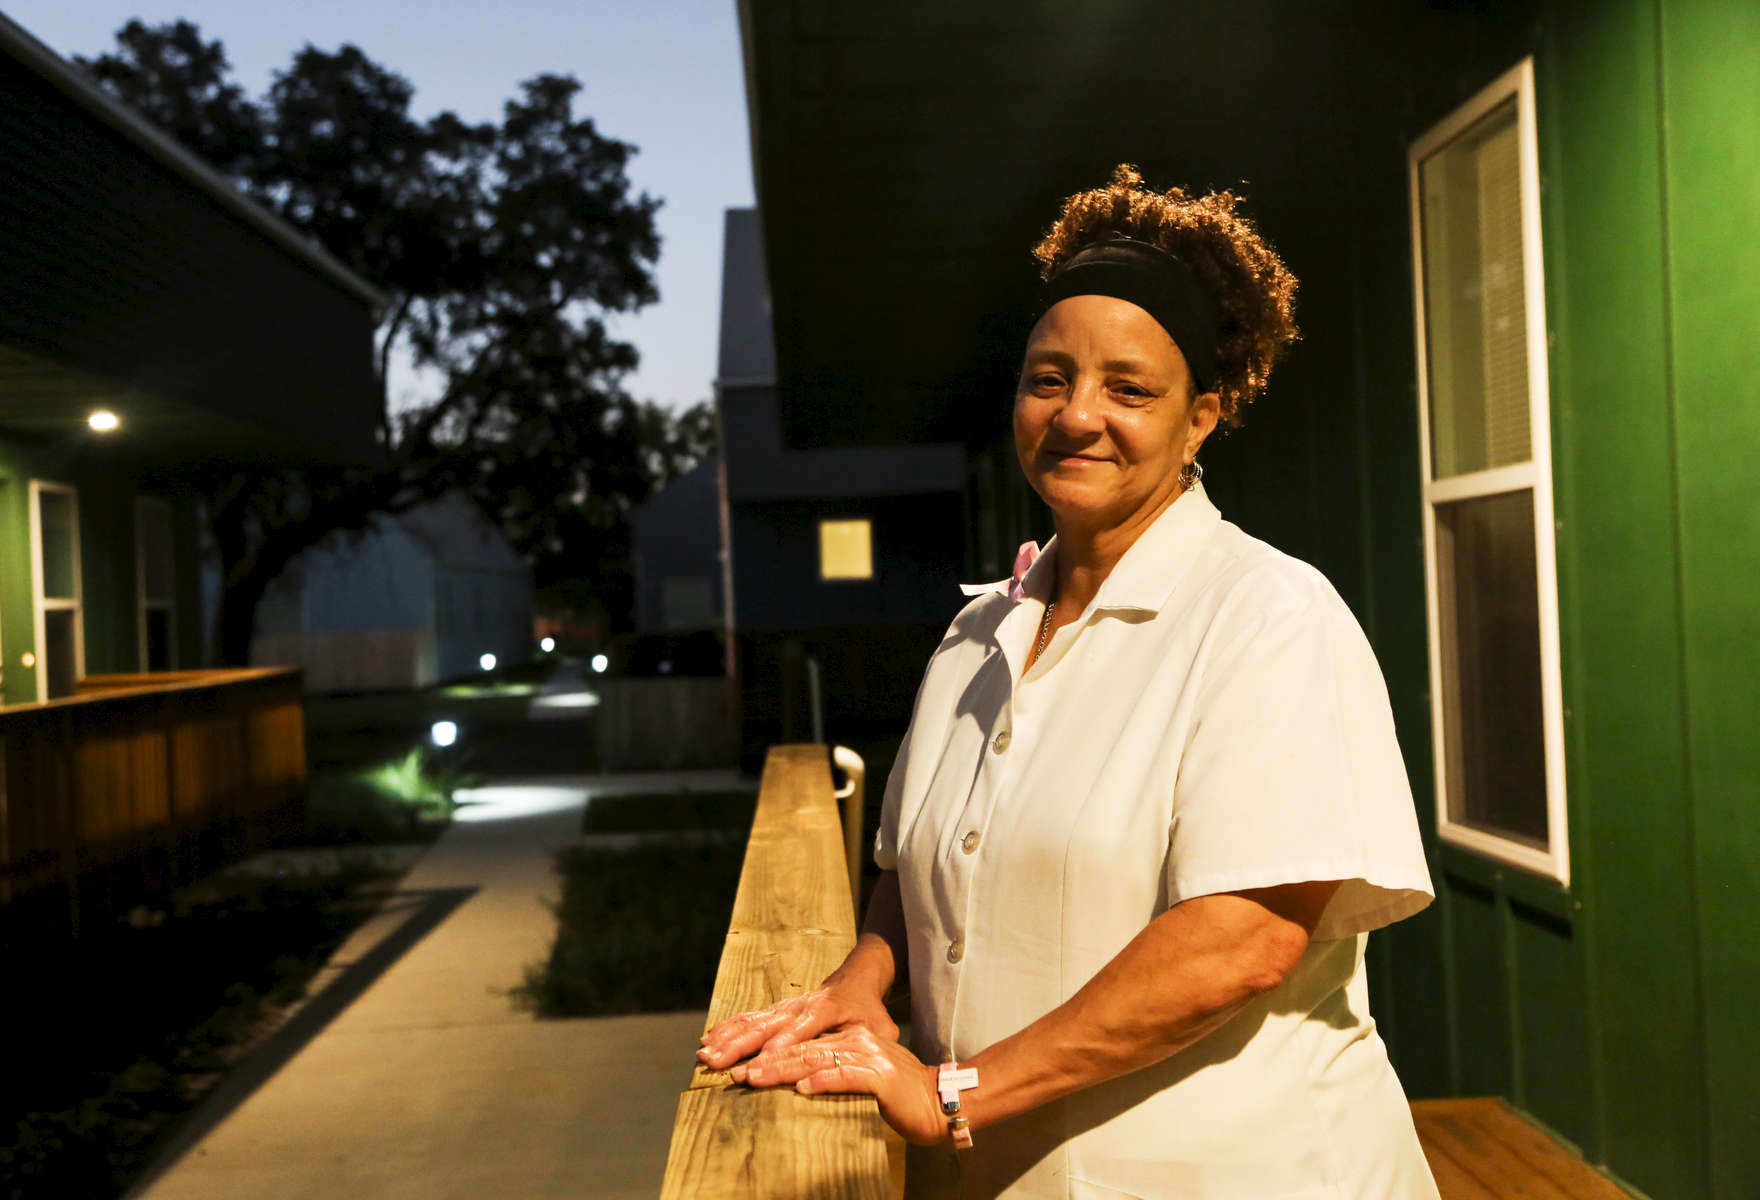 Bastion resident Sylvia Magee 61 in front of her home at the Bastion resident community in New Orleans.